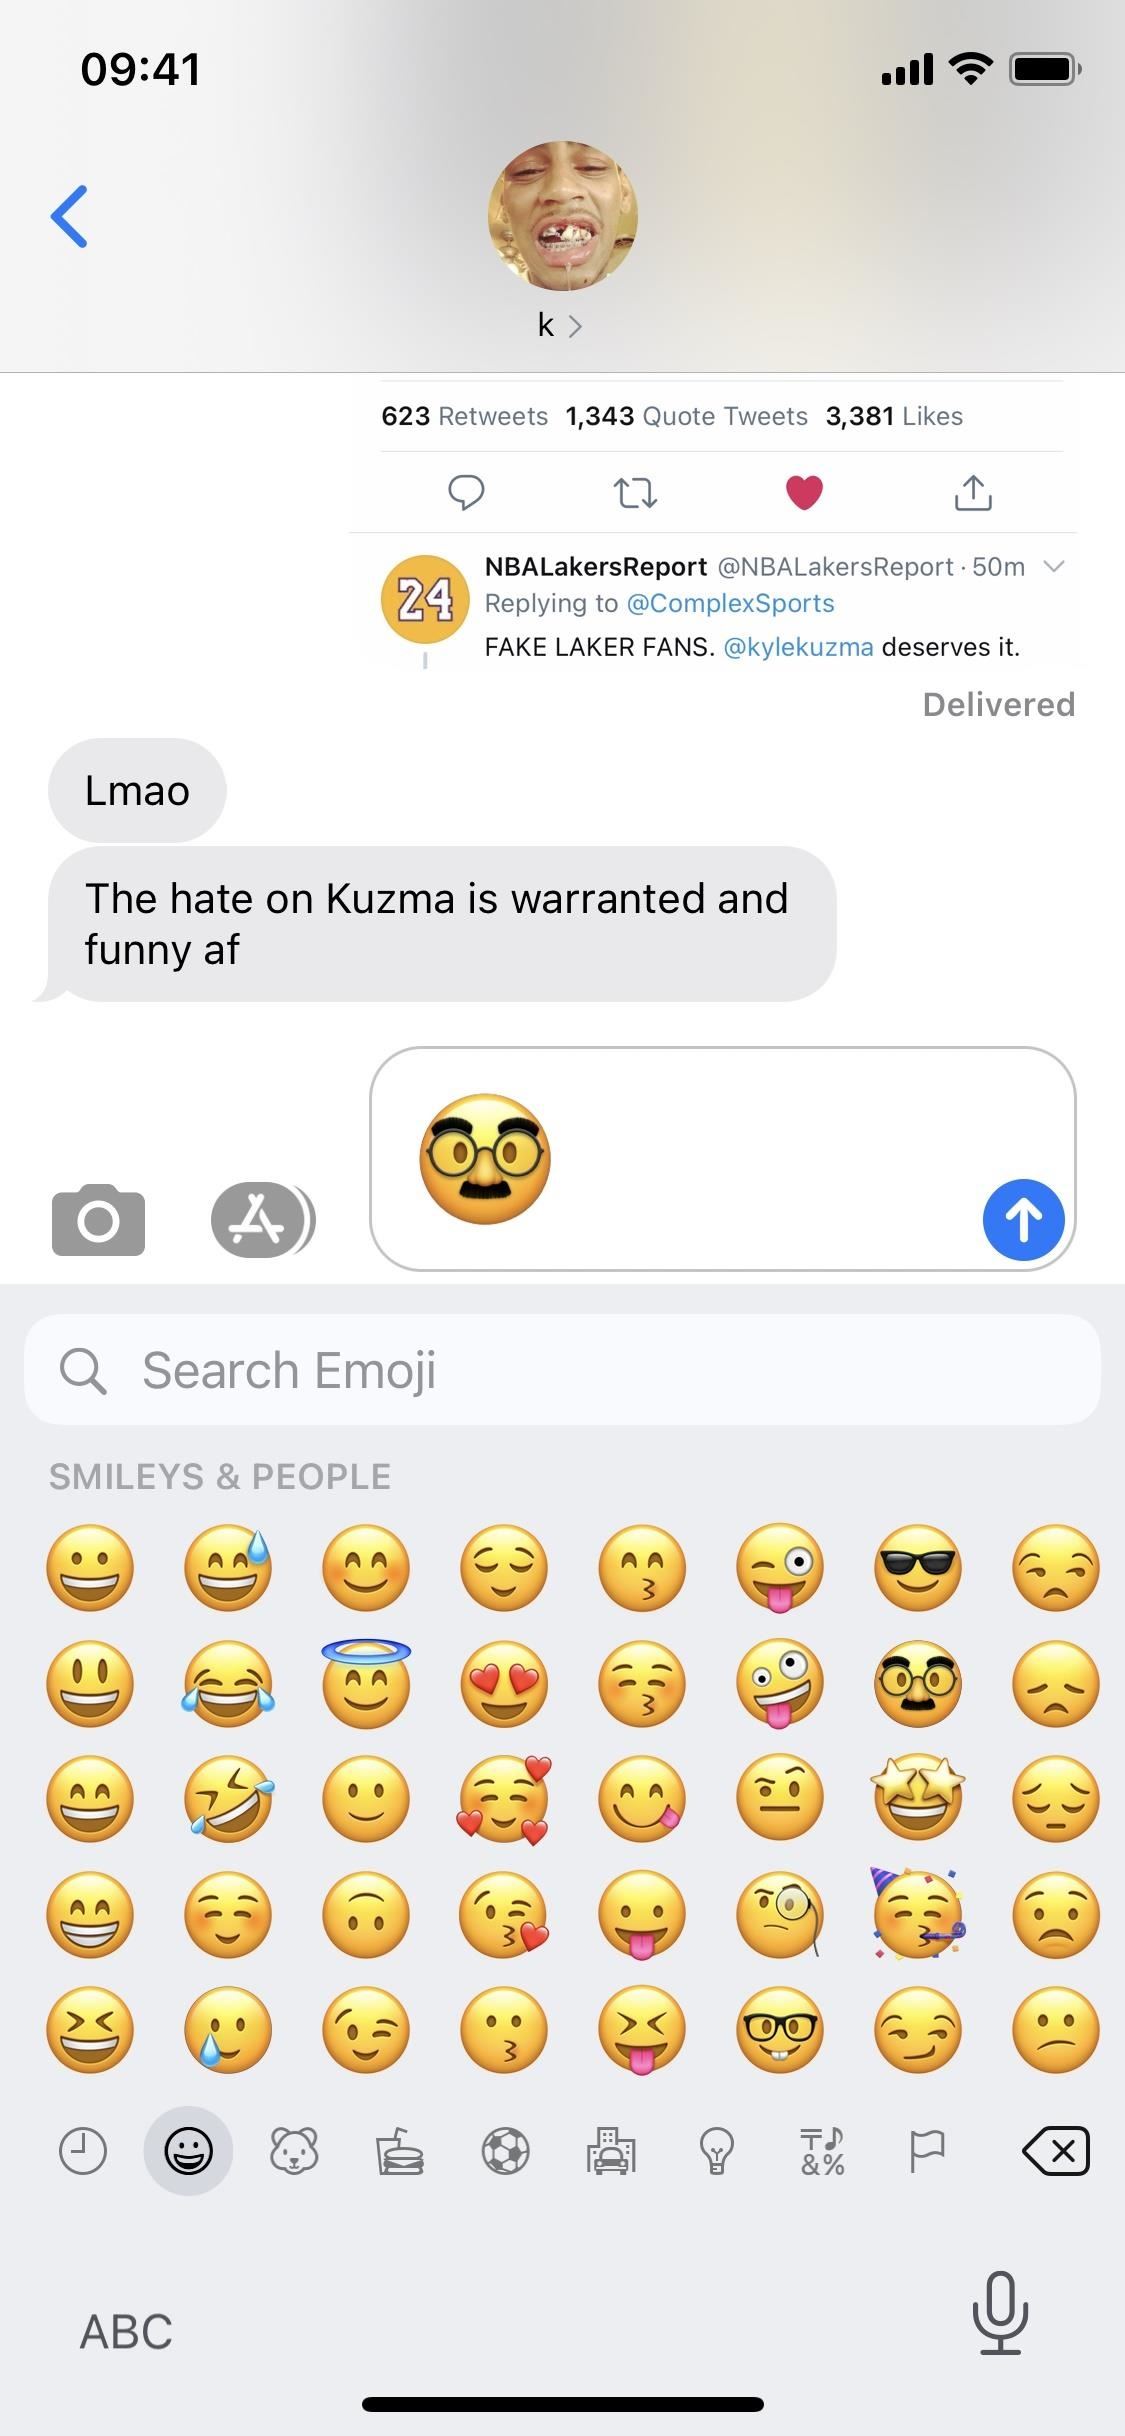 Make Your iPhone Tell You the Secret Meaning of Emoji So They're Easier to Find Later